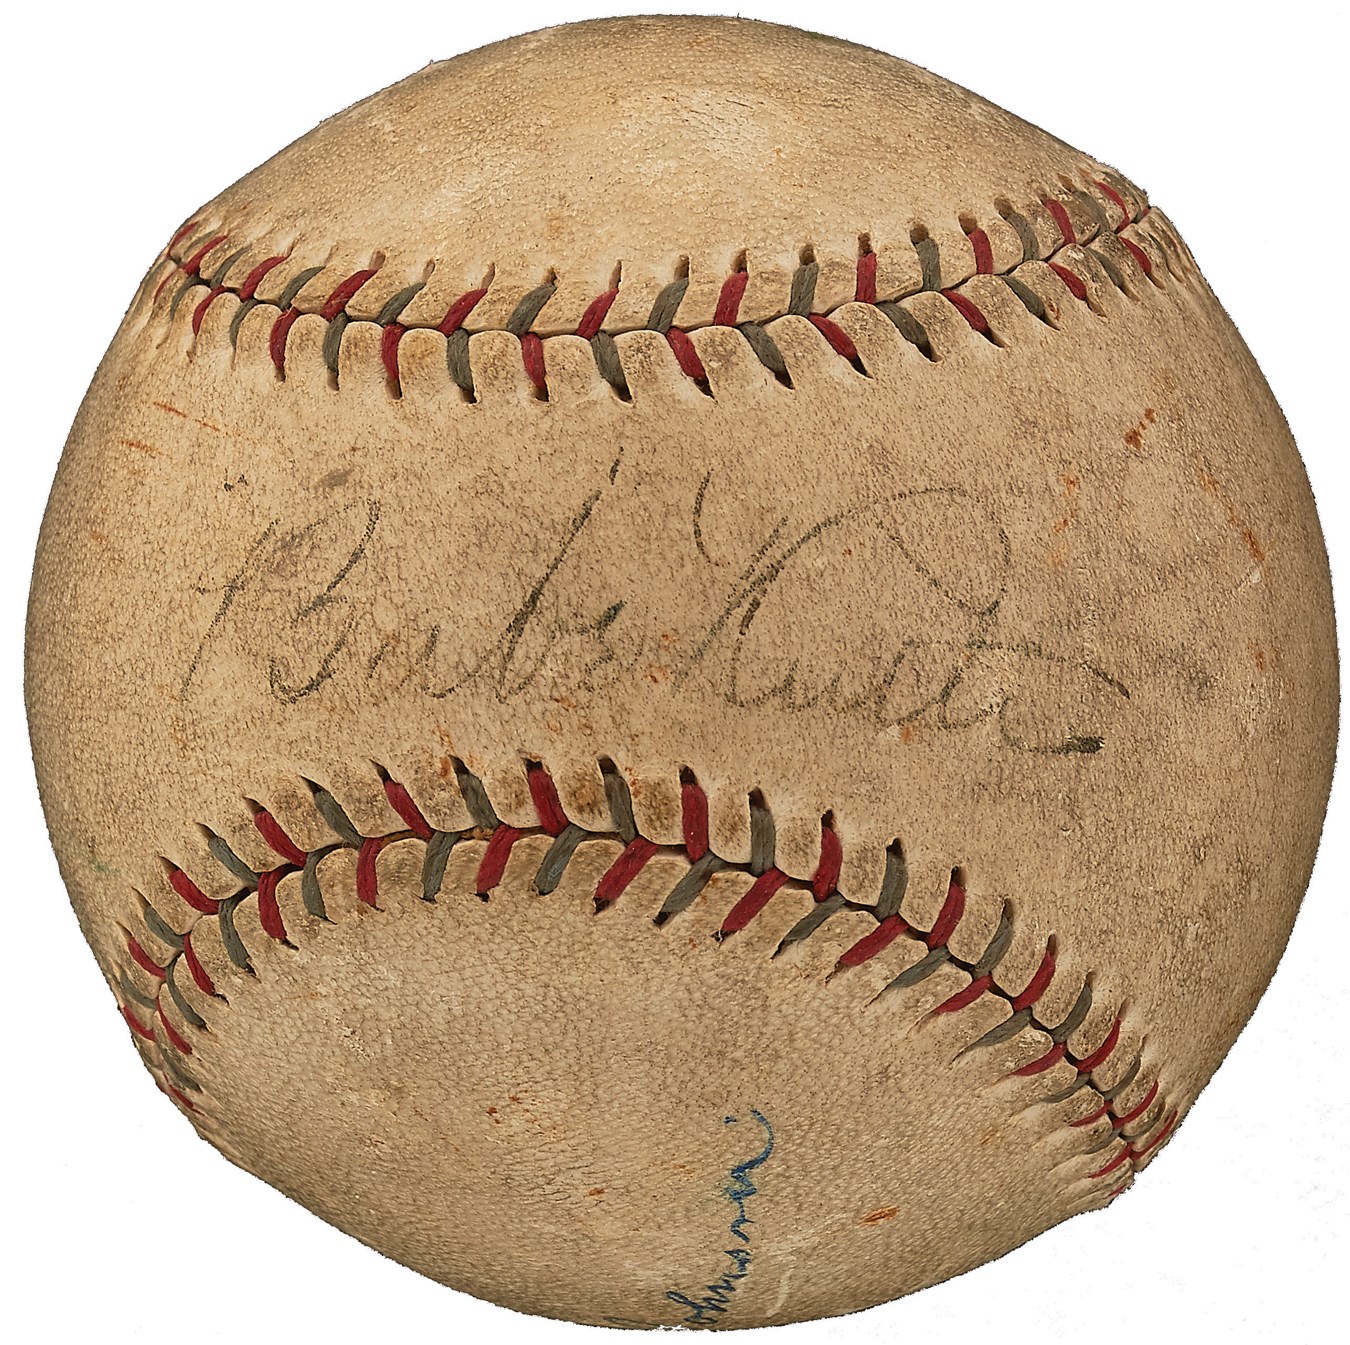 Ruth and Gehrig - 1926-27 Babe Ruth Single-Signed Official American League Ban Johnson Baseball (PSA)